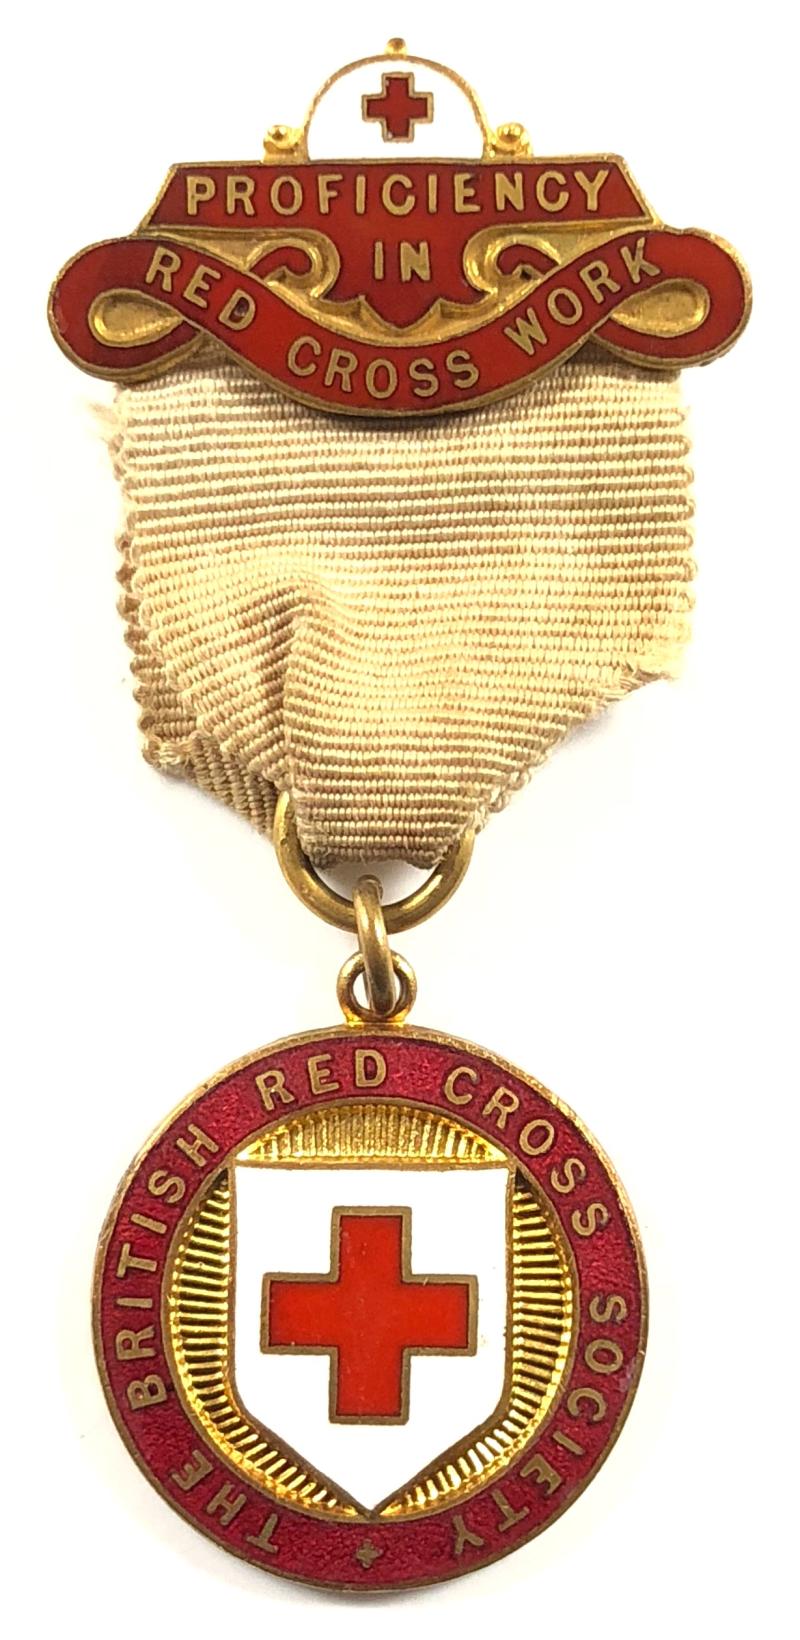 British Red Cross Society proficiency in red cross work badge c1911 to 1914